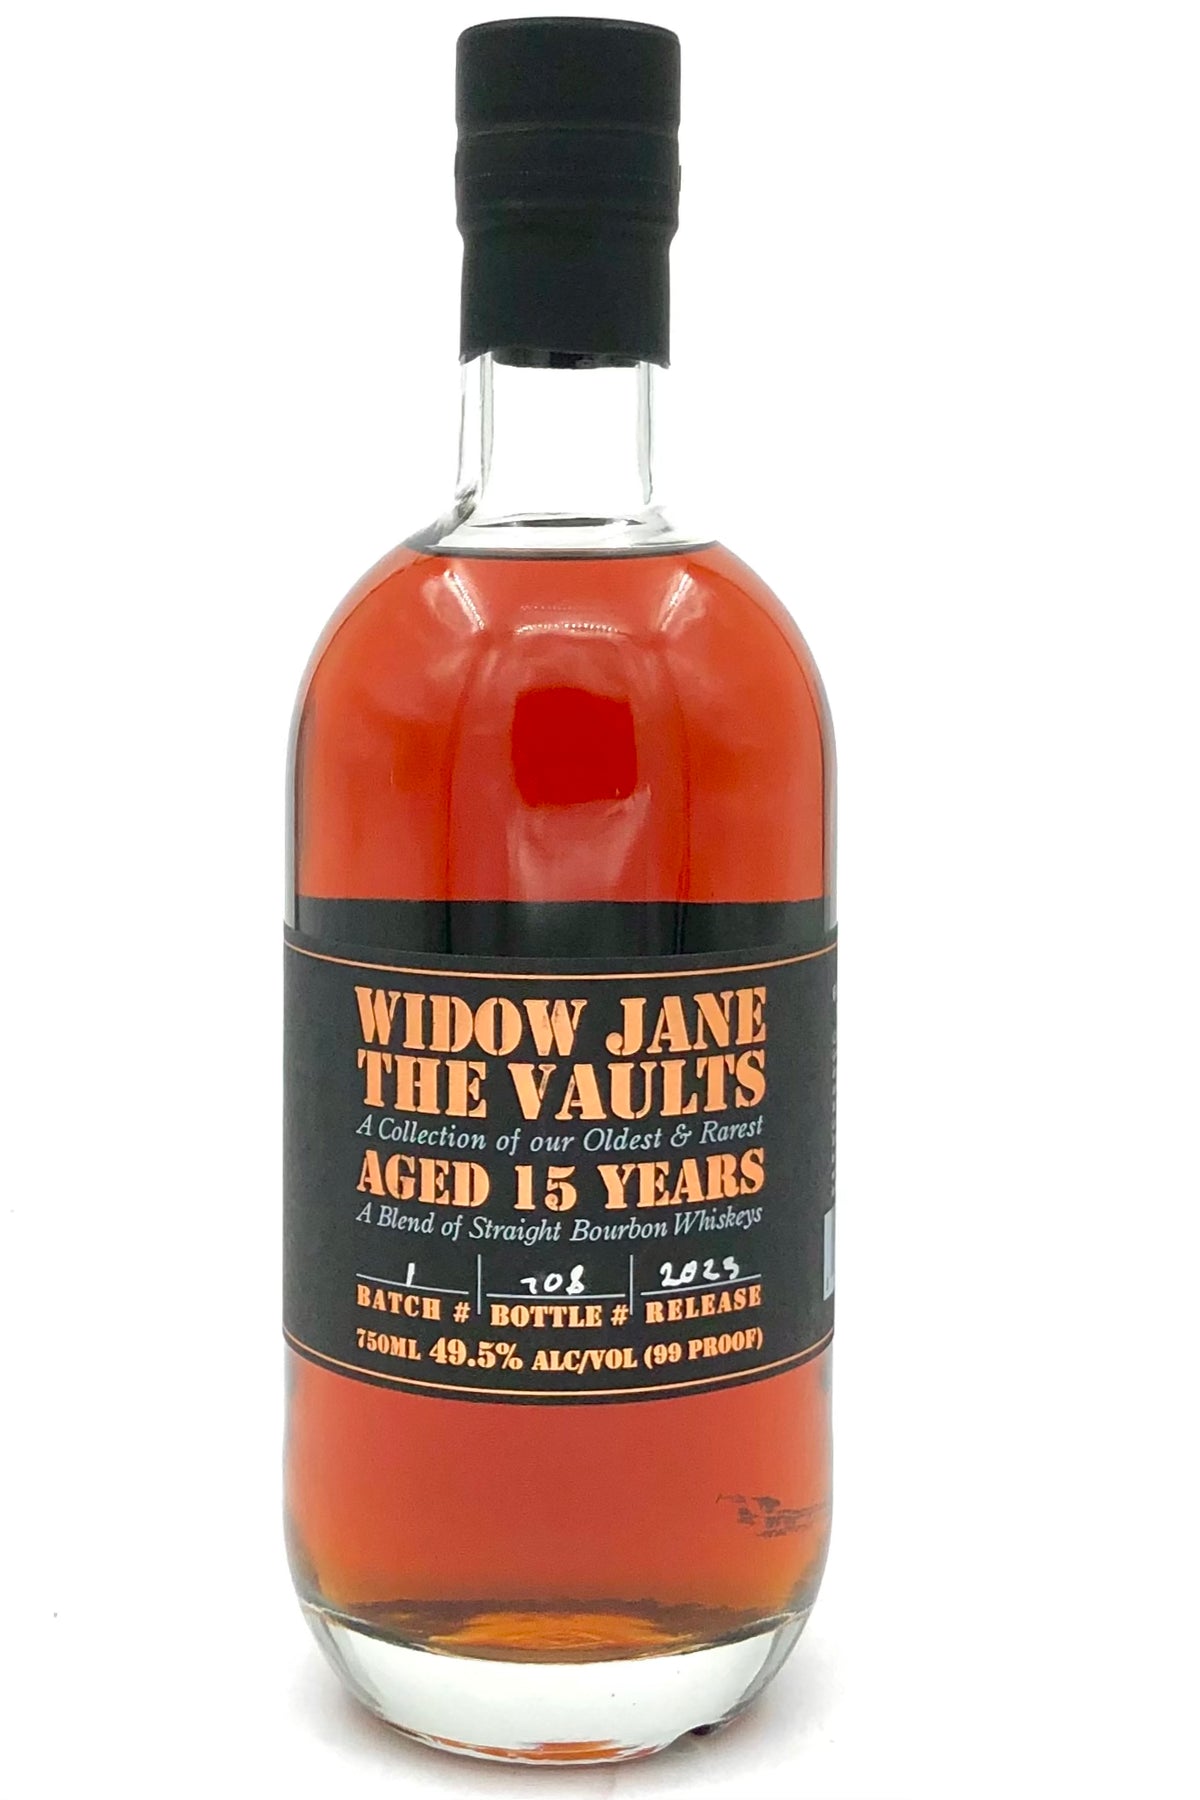 Widow Jane The Vaults 15 Year old Bourbon Whiskey